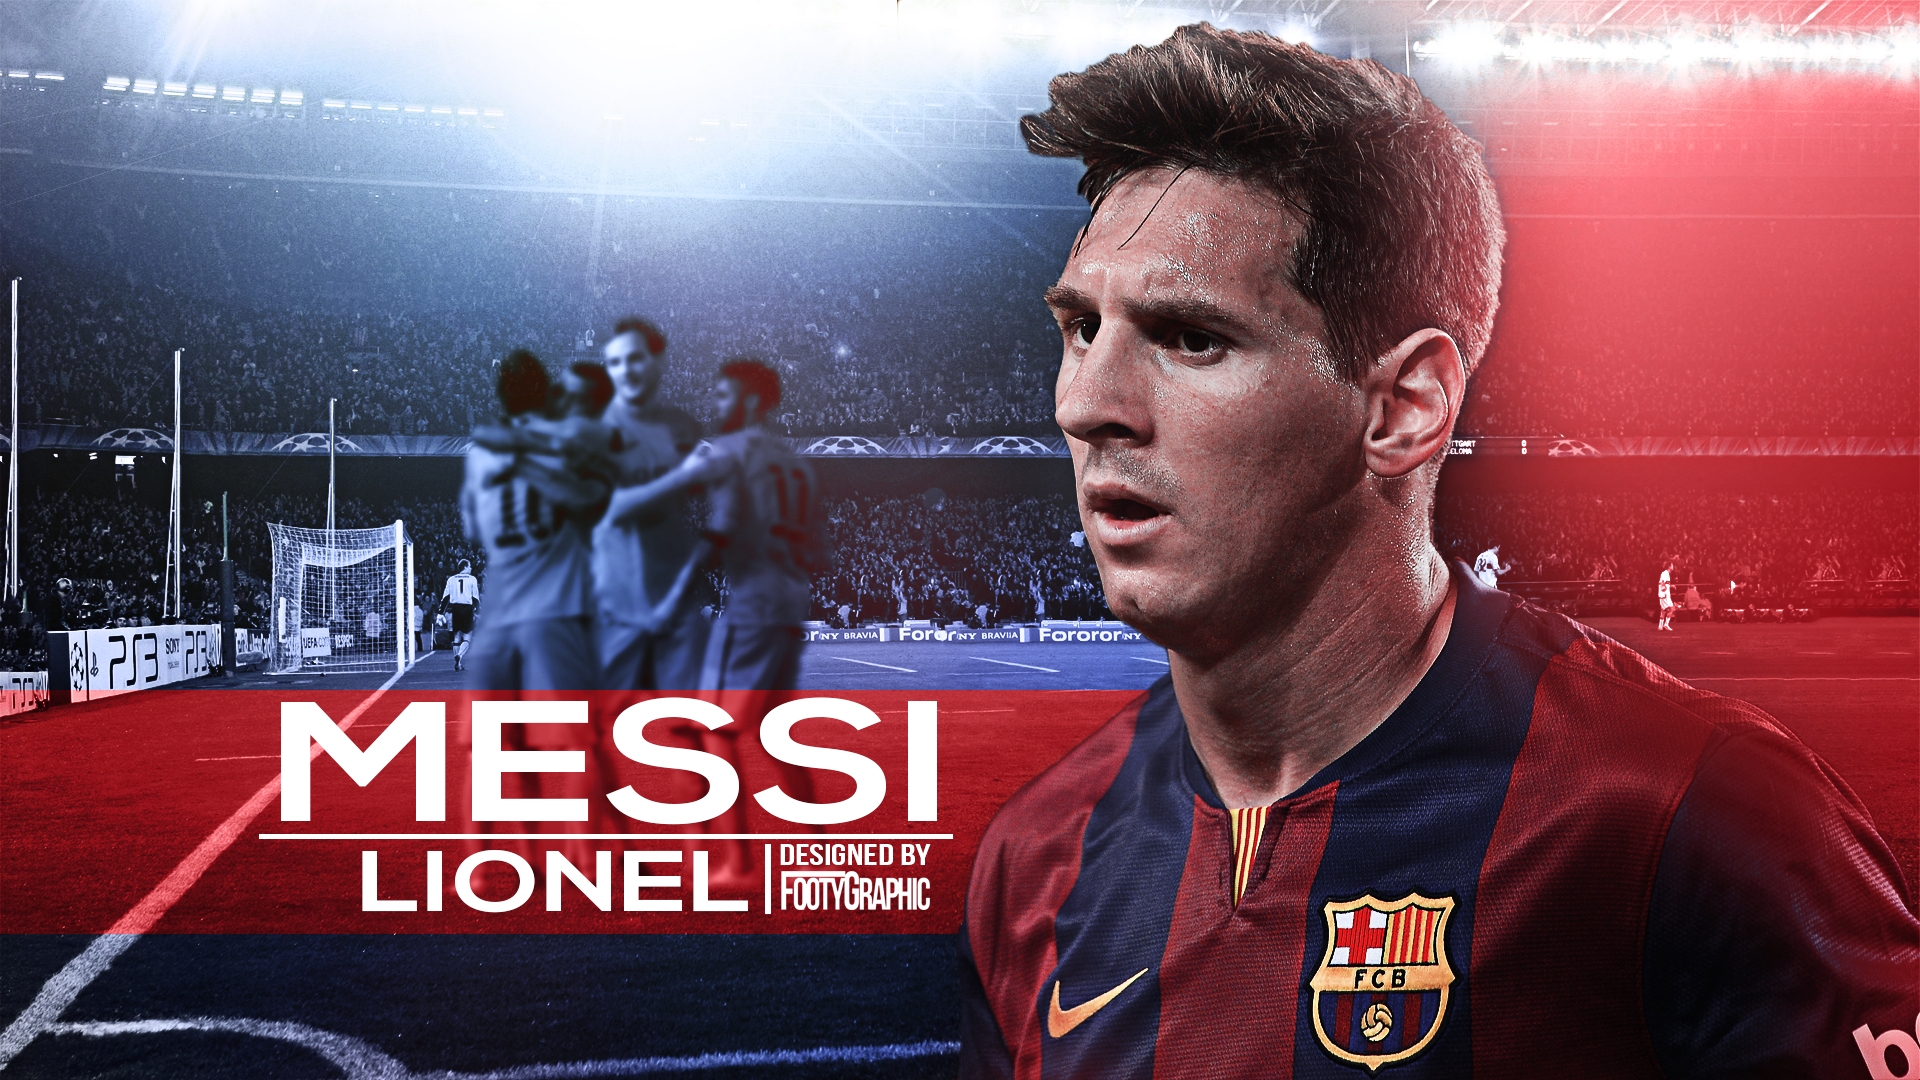 Lionel Messi Wallpapers HD download free Wallpapers Backgrounds